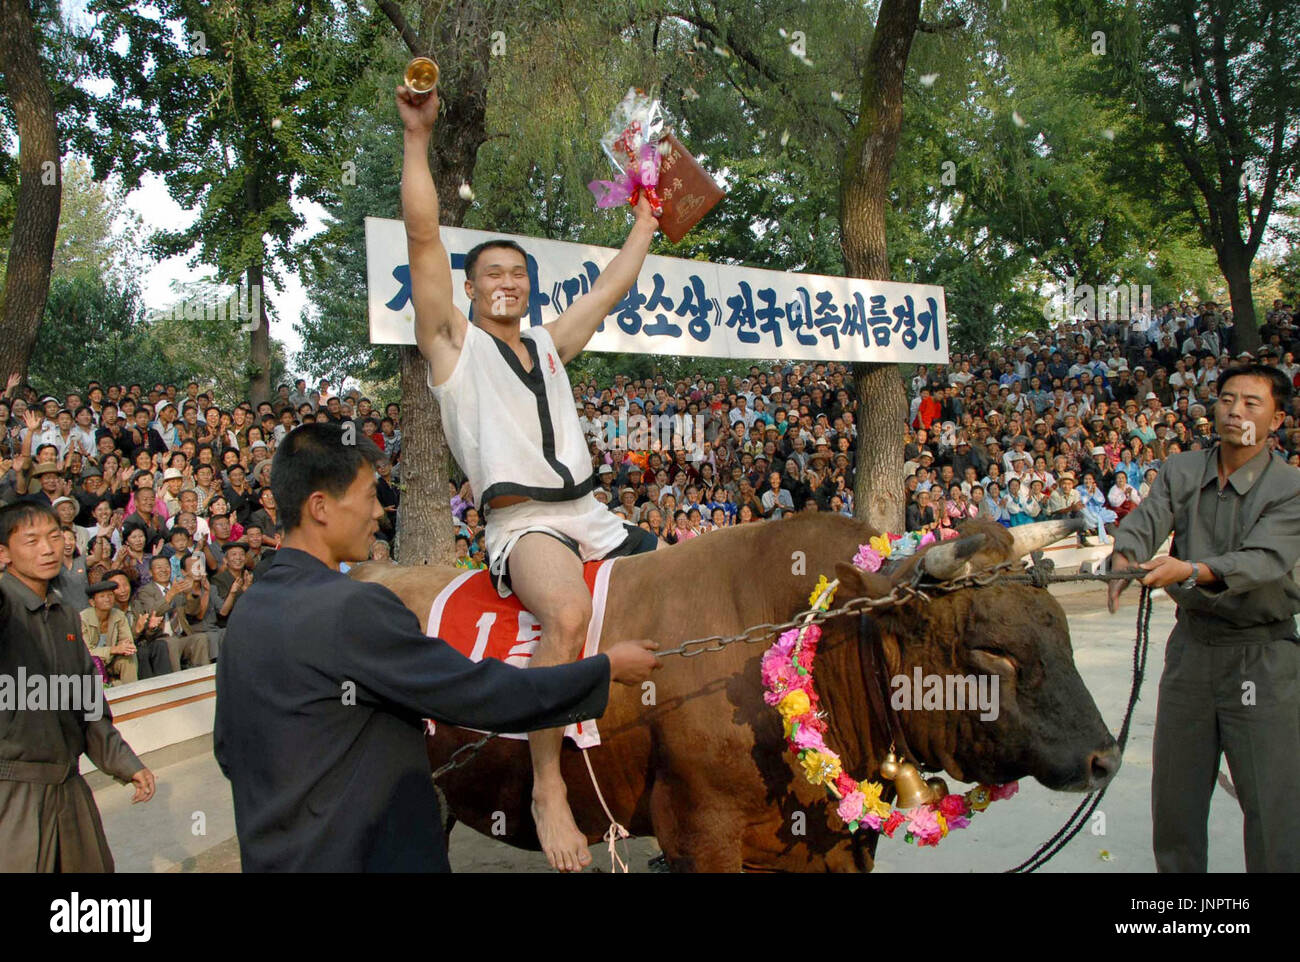 PYONGYANG, North Korea - Ri Jo Won (C) from North Phyongan Province in North Korea celebrates astride a grand bull, weighing nearly a ton, given to him in place of a cash award for winning a national ''ssirum,'' or Korean wrestling, tournament, in Pyongyang on Sept. 25, 2009. Ri, 30, came first at the catch-weight event in which 20 grapplers competed. (Kyodo) Stock Photo